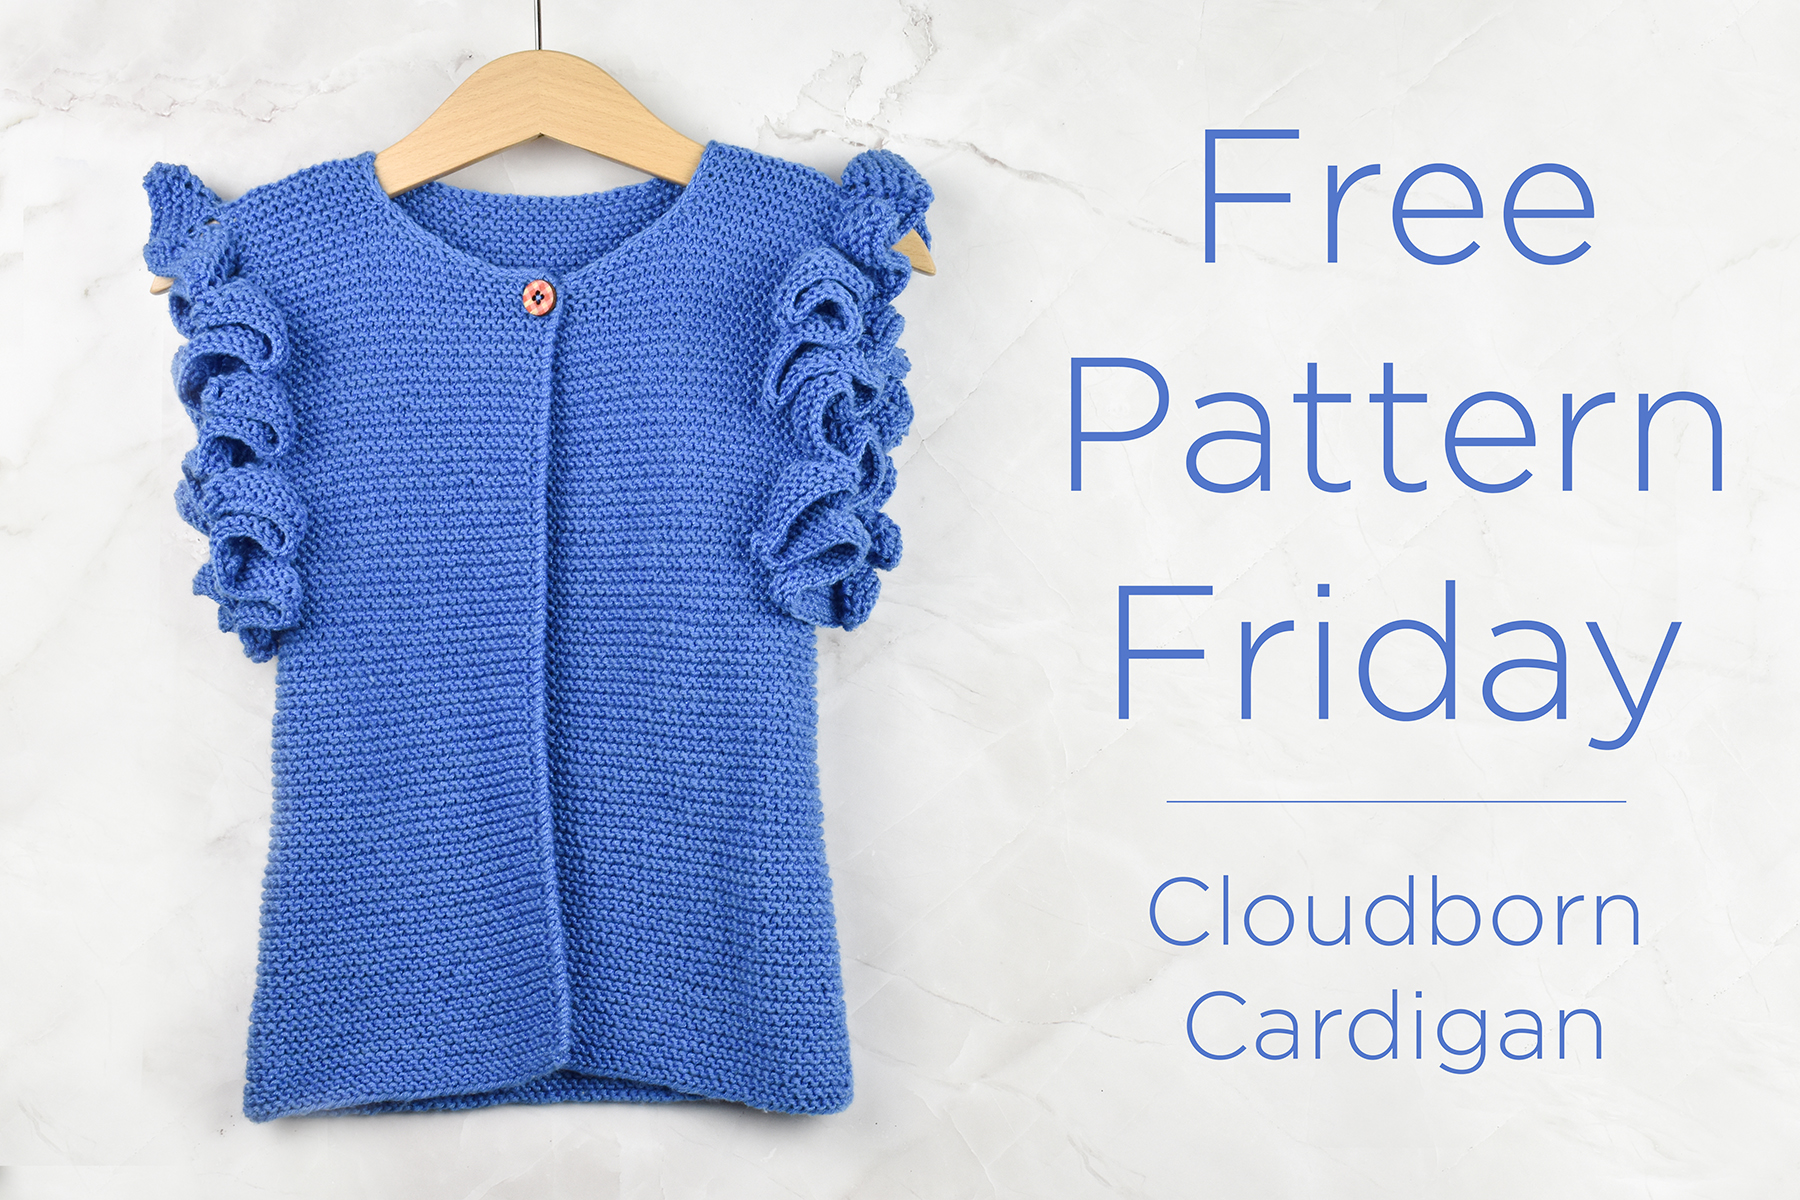 Photo of the Cloudborn Cardigan on a hook with text to the right saying "Free Pattern Friday - Cloudborn Cardigan"